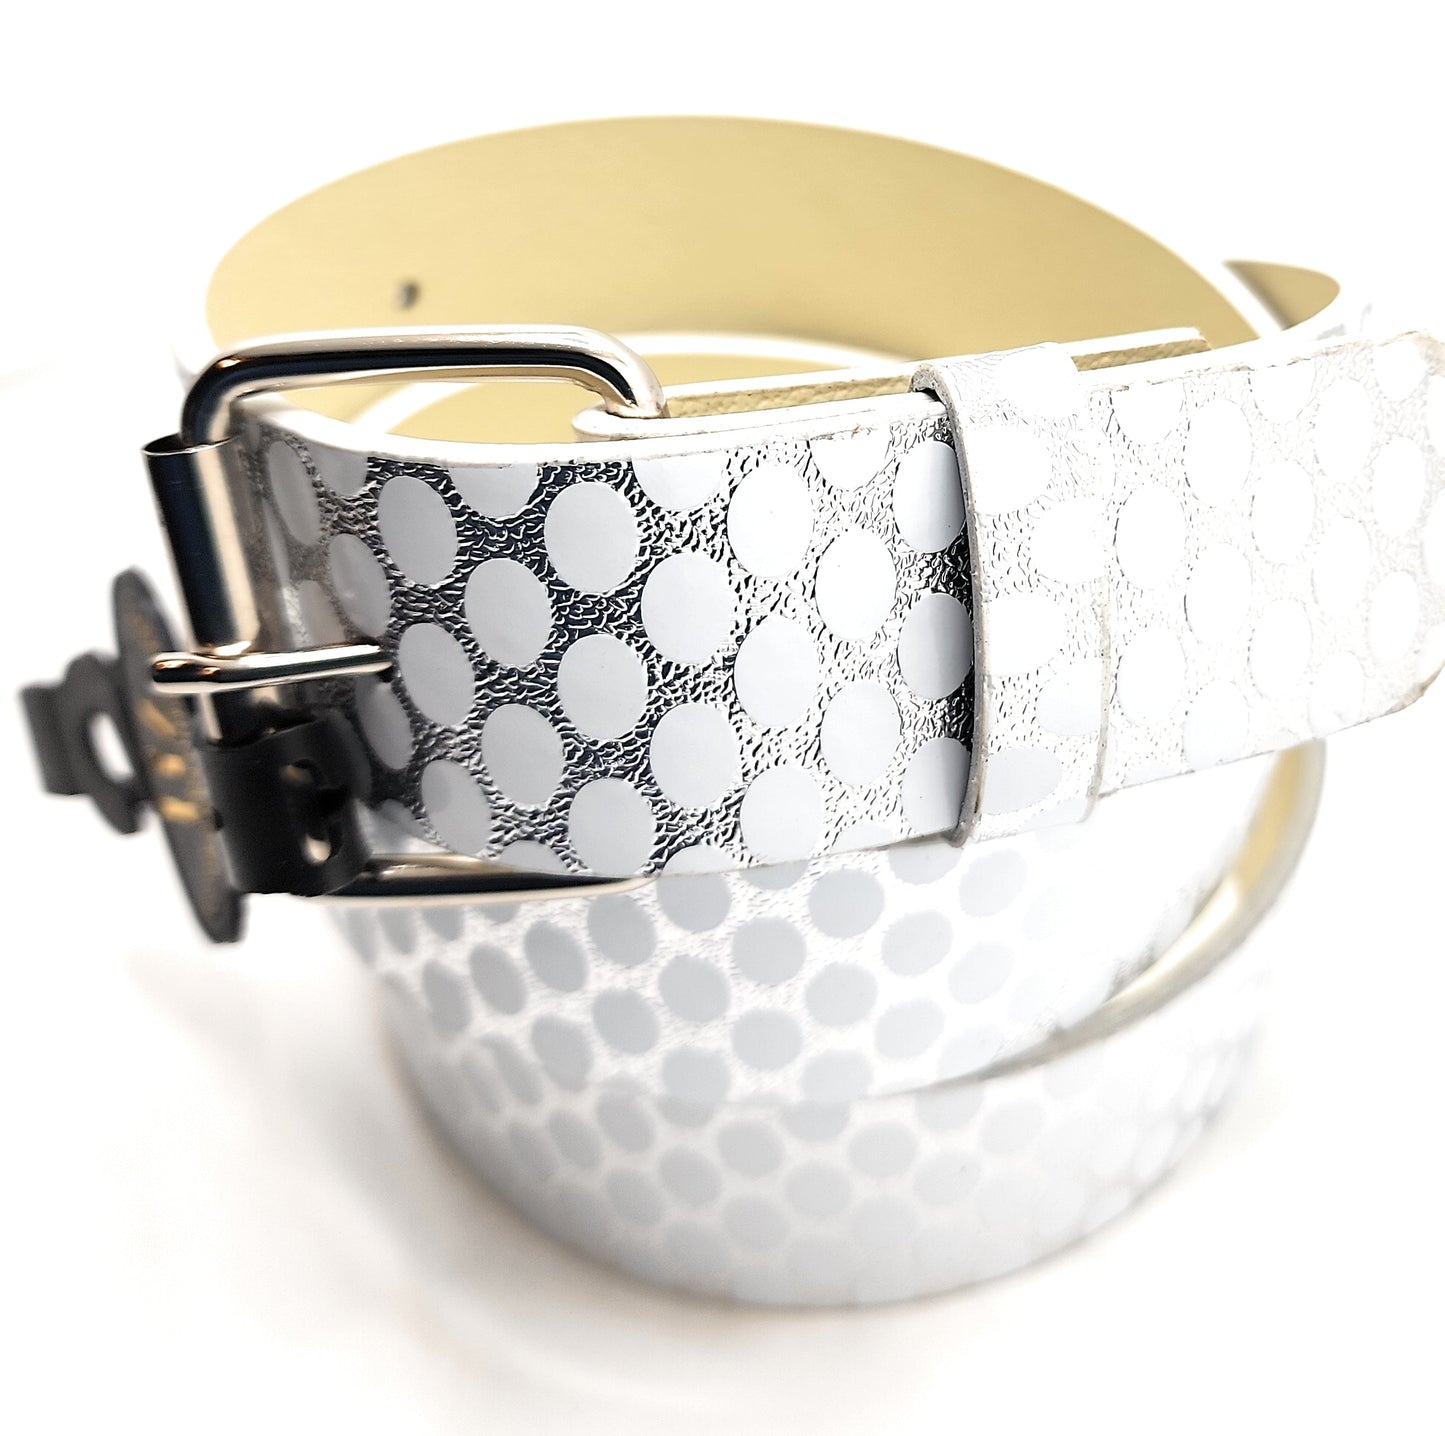 White and Silver Ovals on White Leather Belt shop.AxeDr.com belt, Genuine Leather, Gift for Him, shiny, white